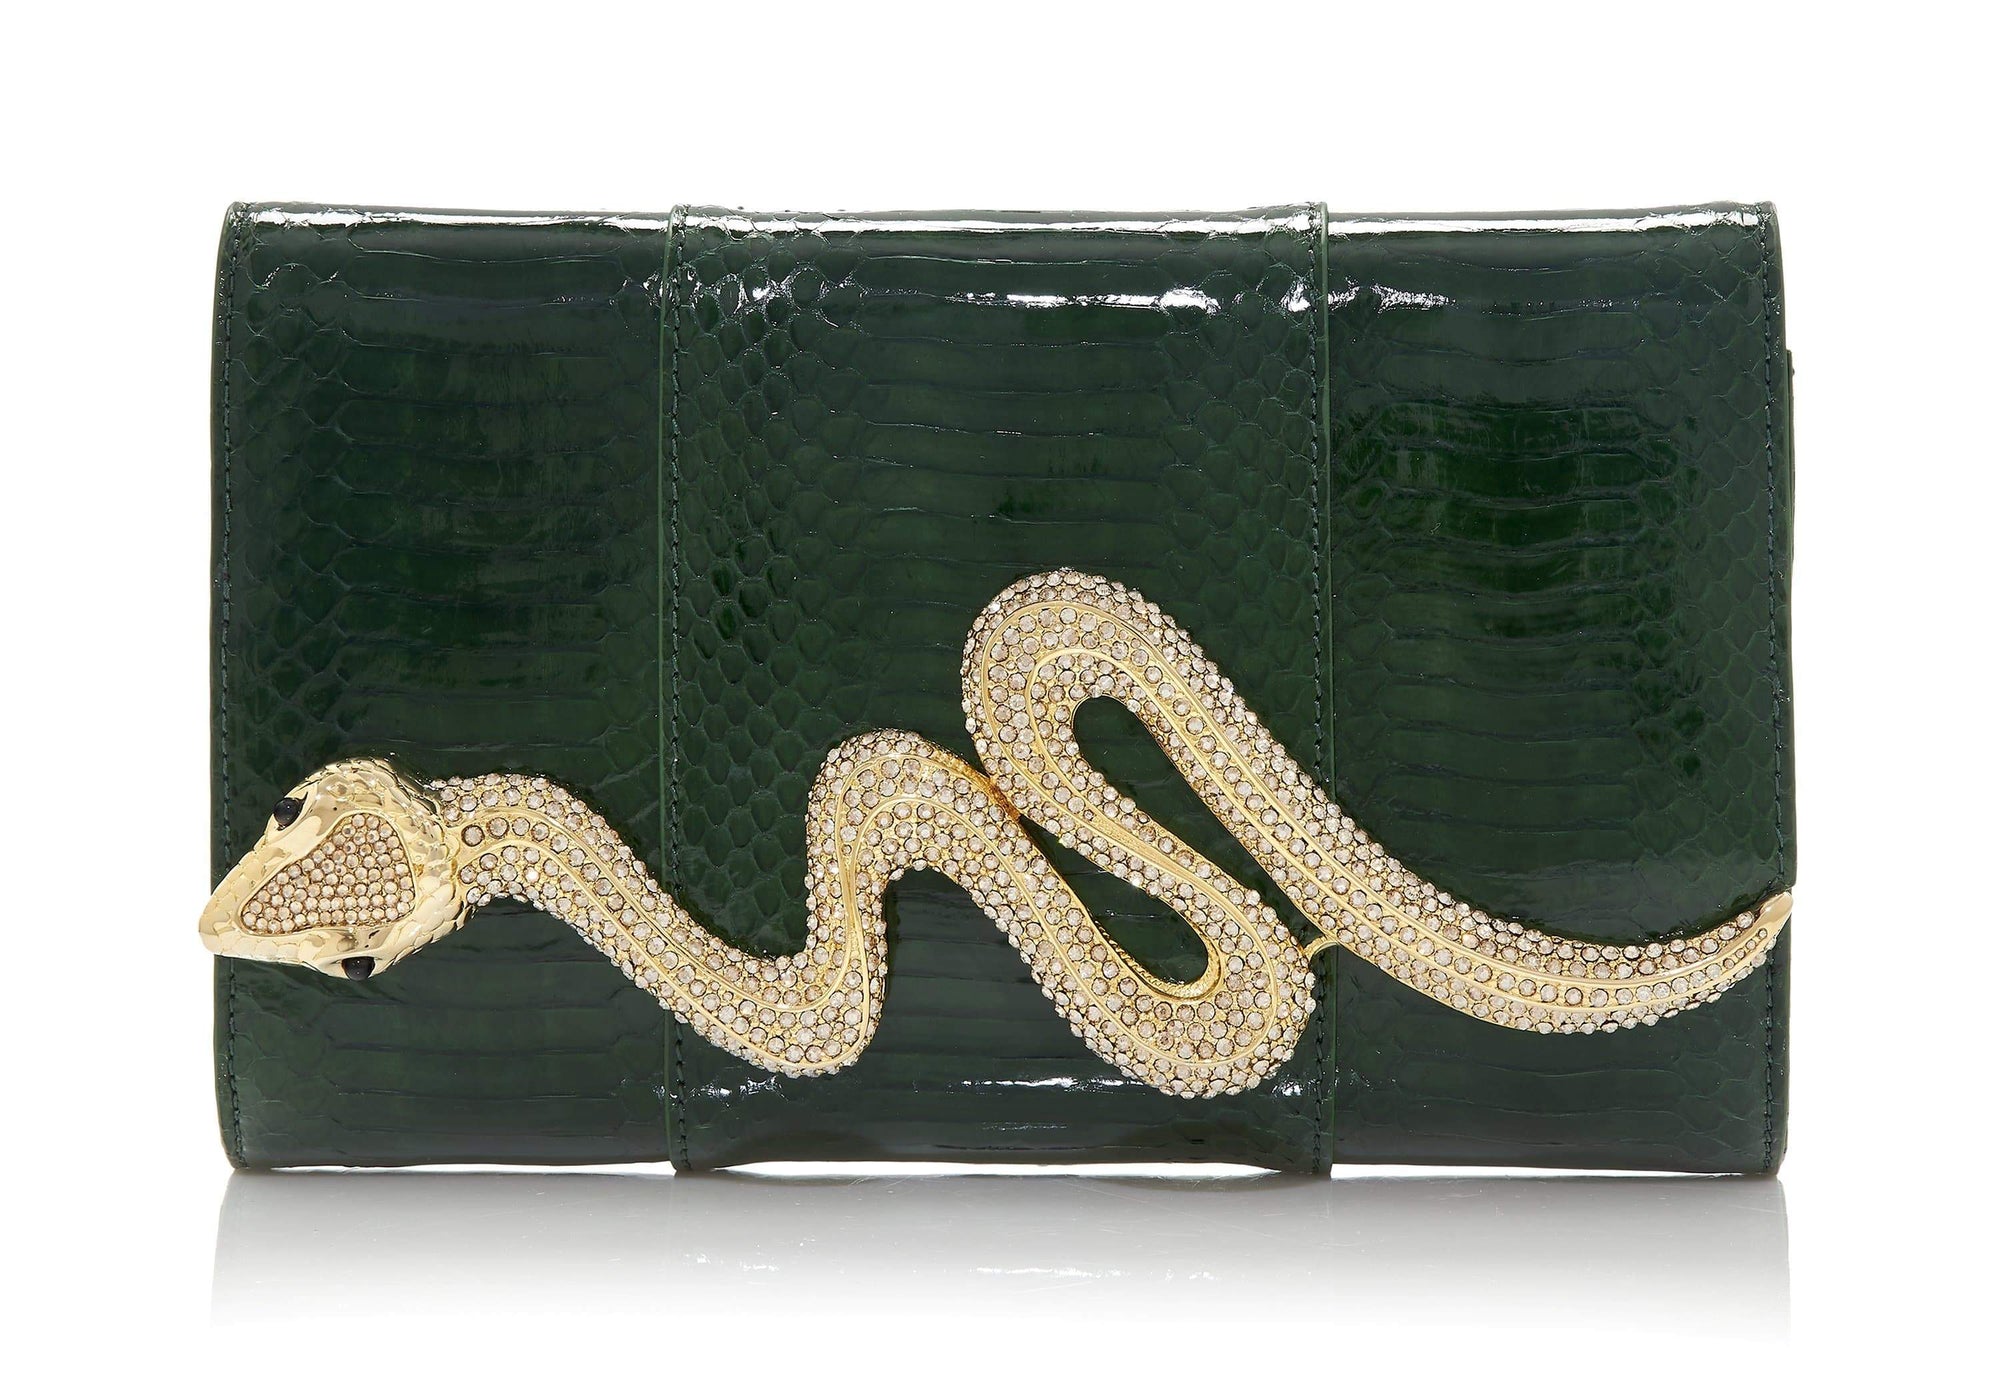 LAUTREC's Exotic Skin and Luxury Leather Handbags and Accessories